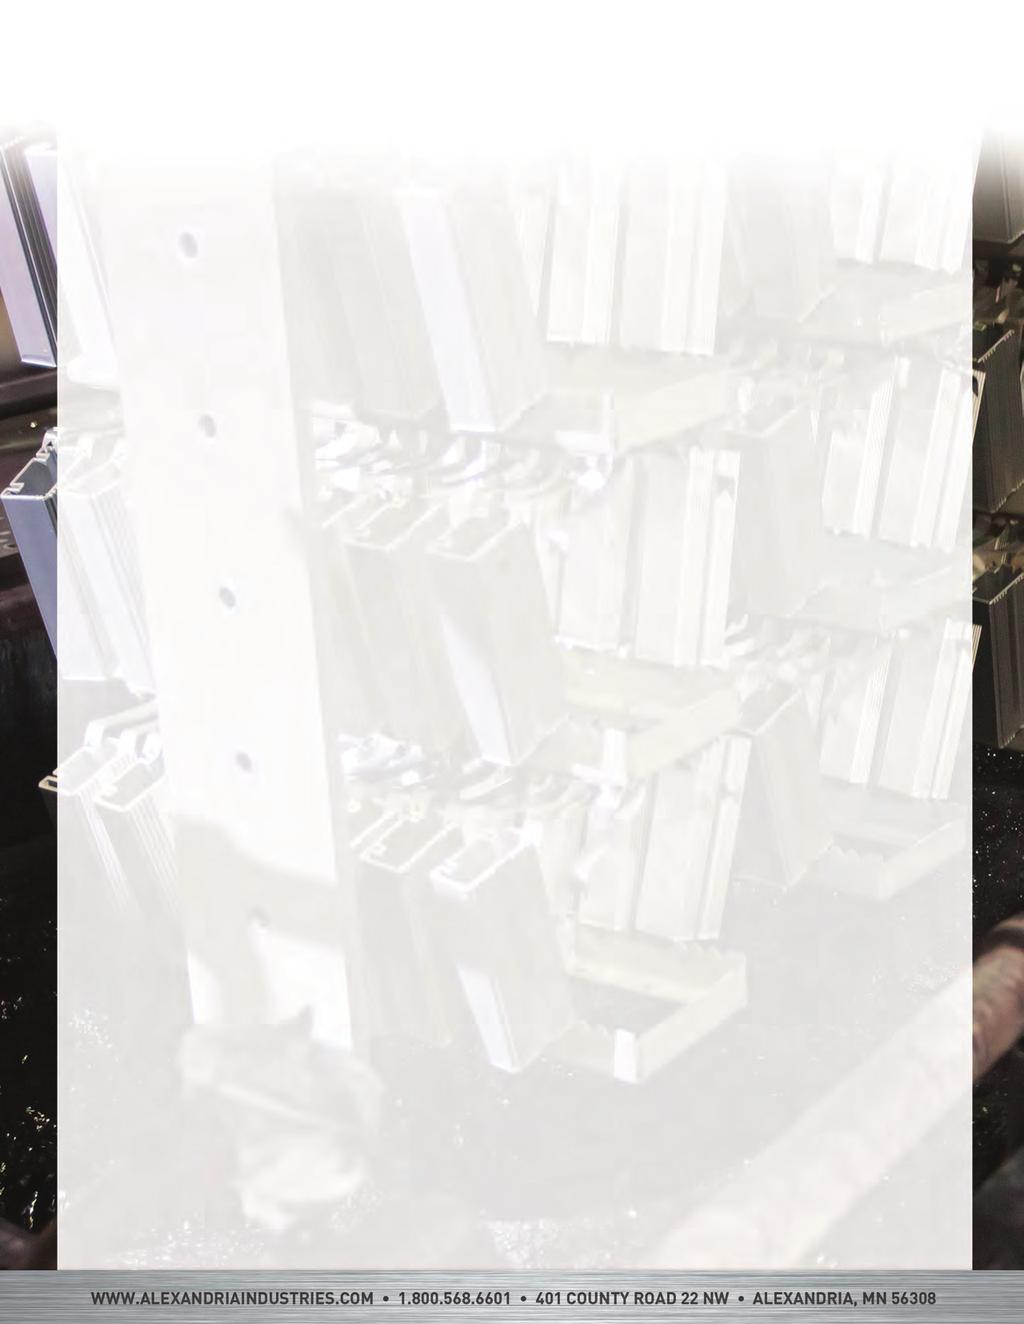 As a full-service aluminum extruder, Alexandria Industries can be your single source supplier offering extruding, machining, stretch forming, bending, welding, finishing, assembly and much more.